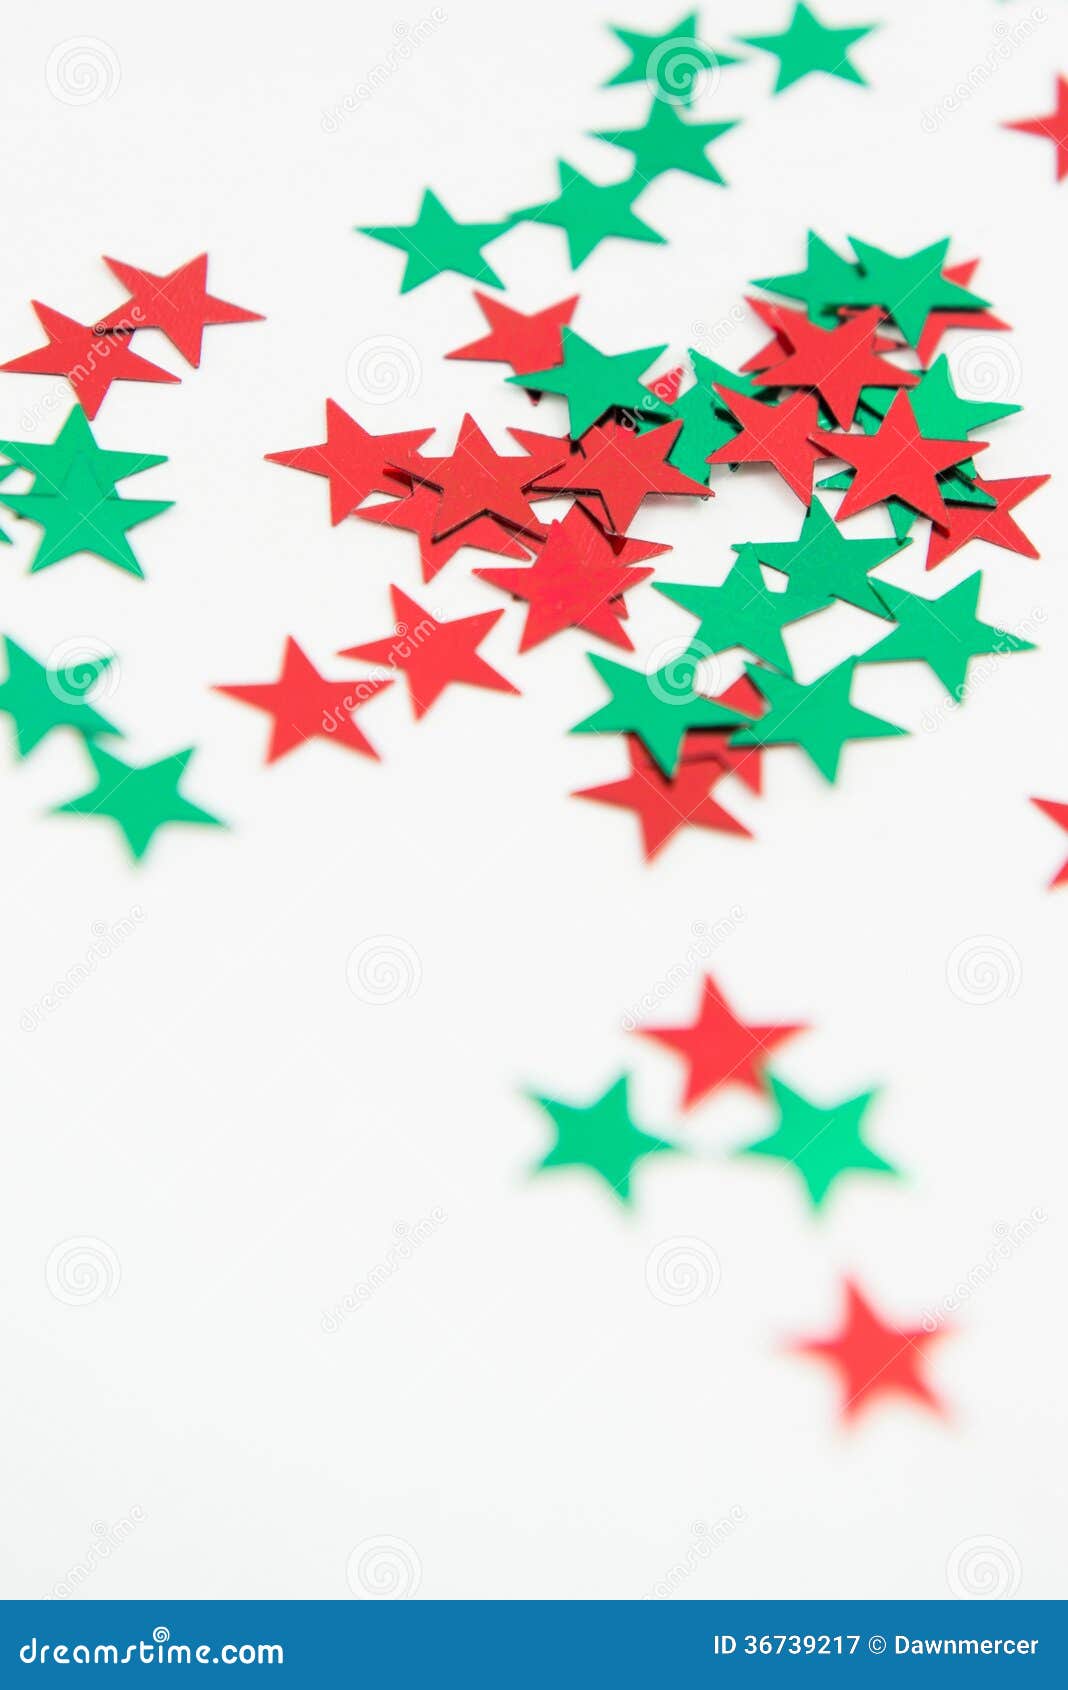 red green star embellishments